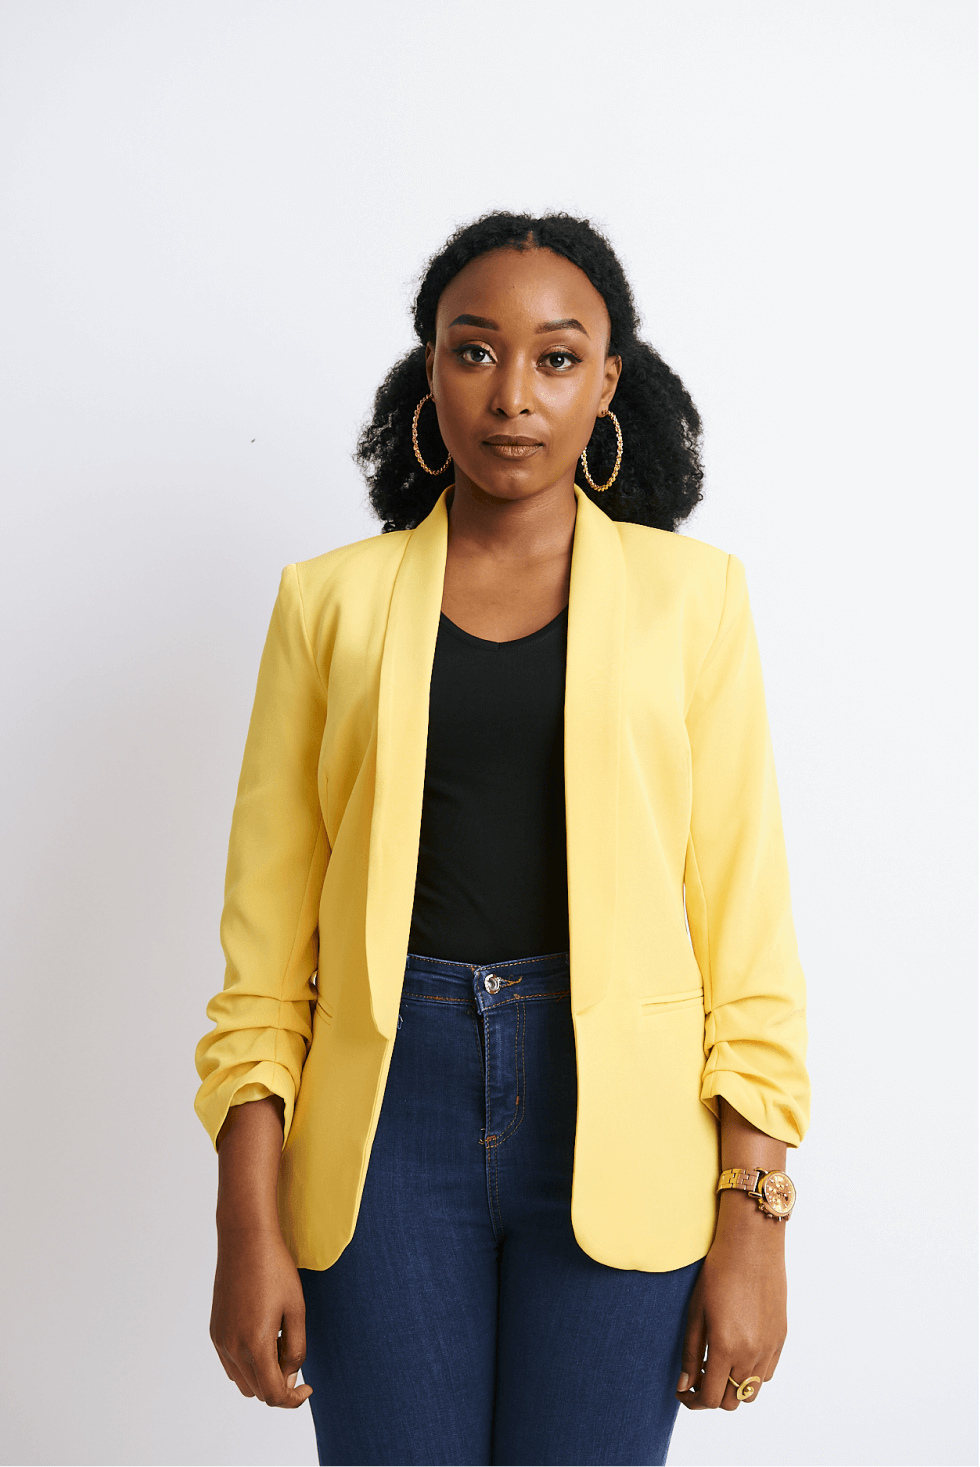 Shop Ruched Sleeved Blazer by The Fashion Frenzy on Arrai. Discover stylish, affordable clothing, jewelry, handbags and unique handmade pieces from top Kenyan & African fashion brands prioritising sustainability and quality craftsmanship.